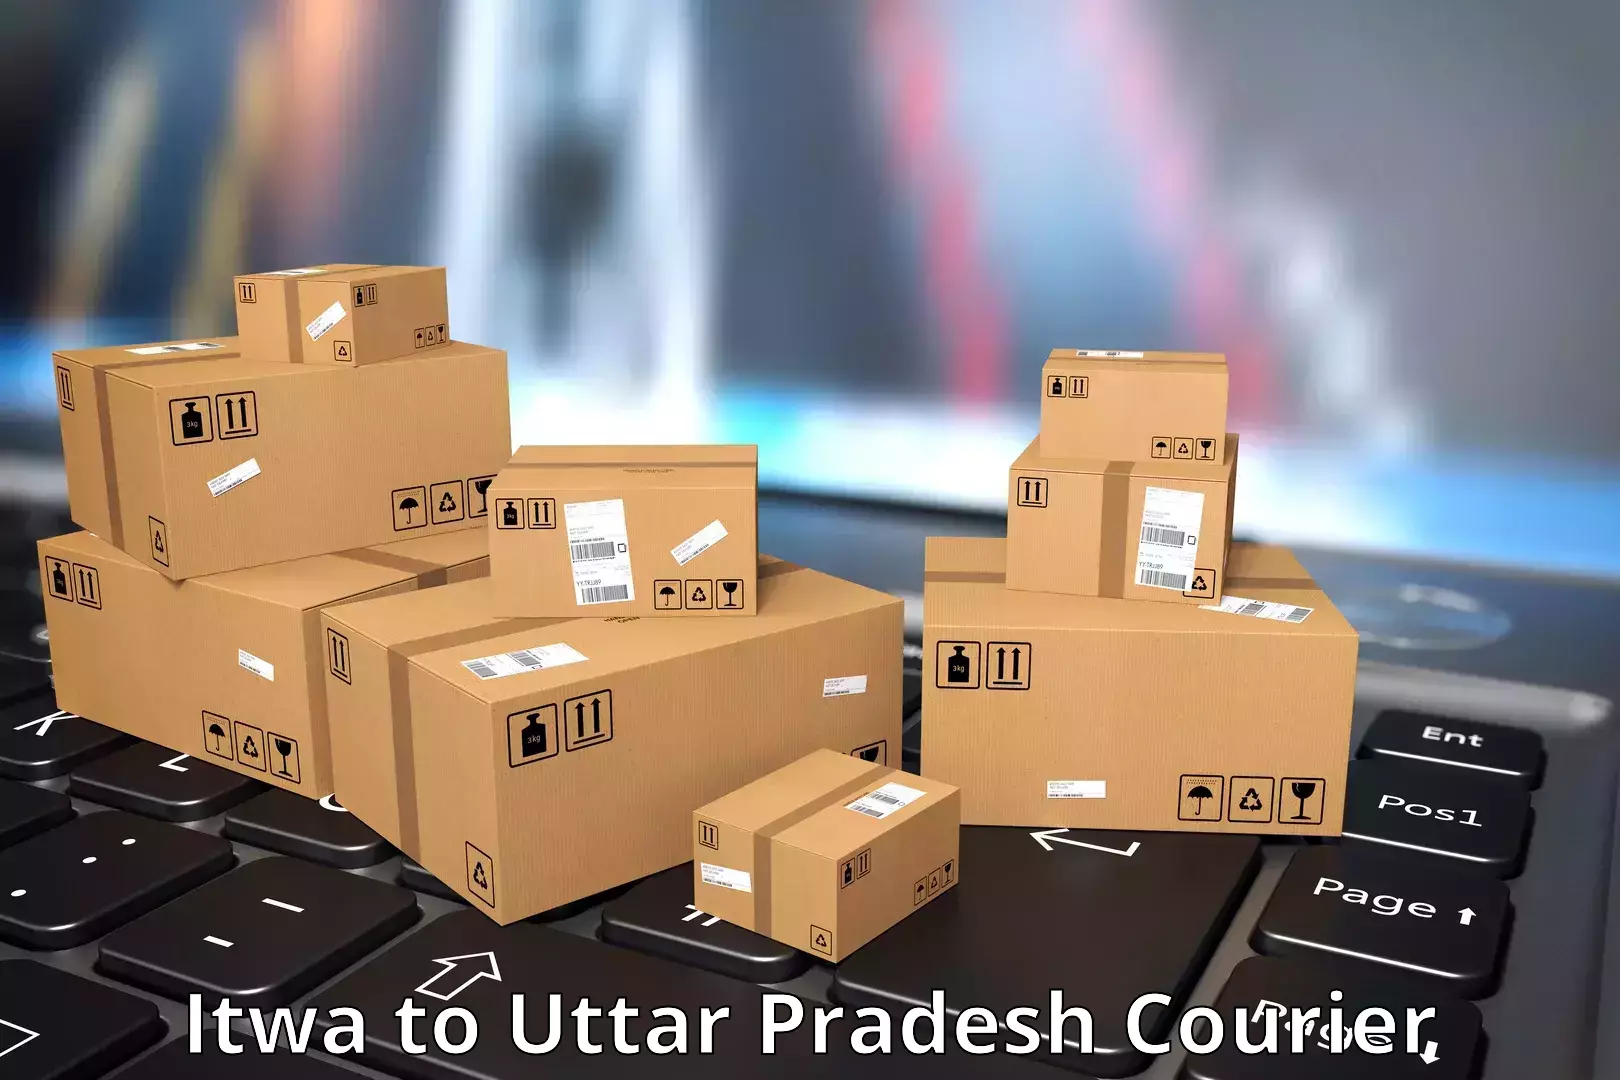 Same-day delivery solutions Itwa to Uttar Pradesh